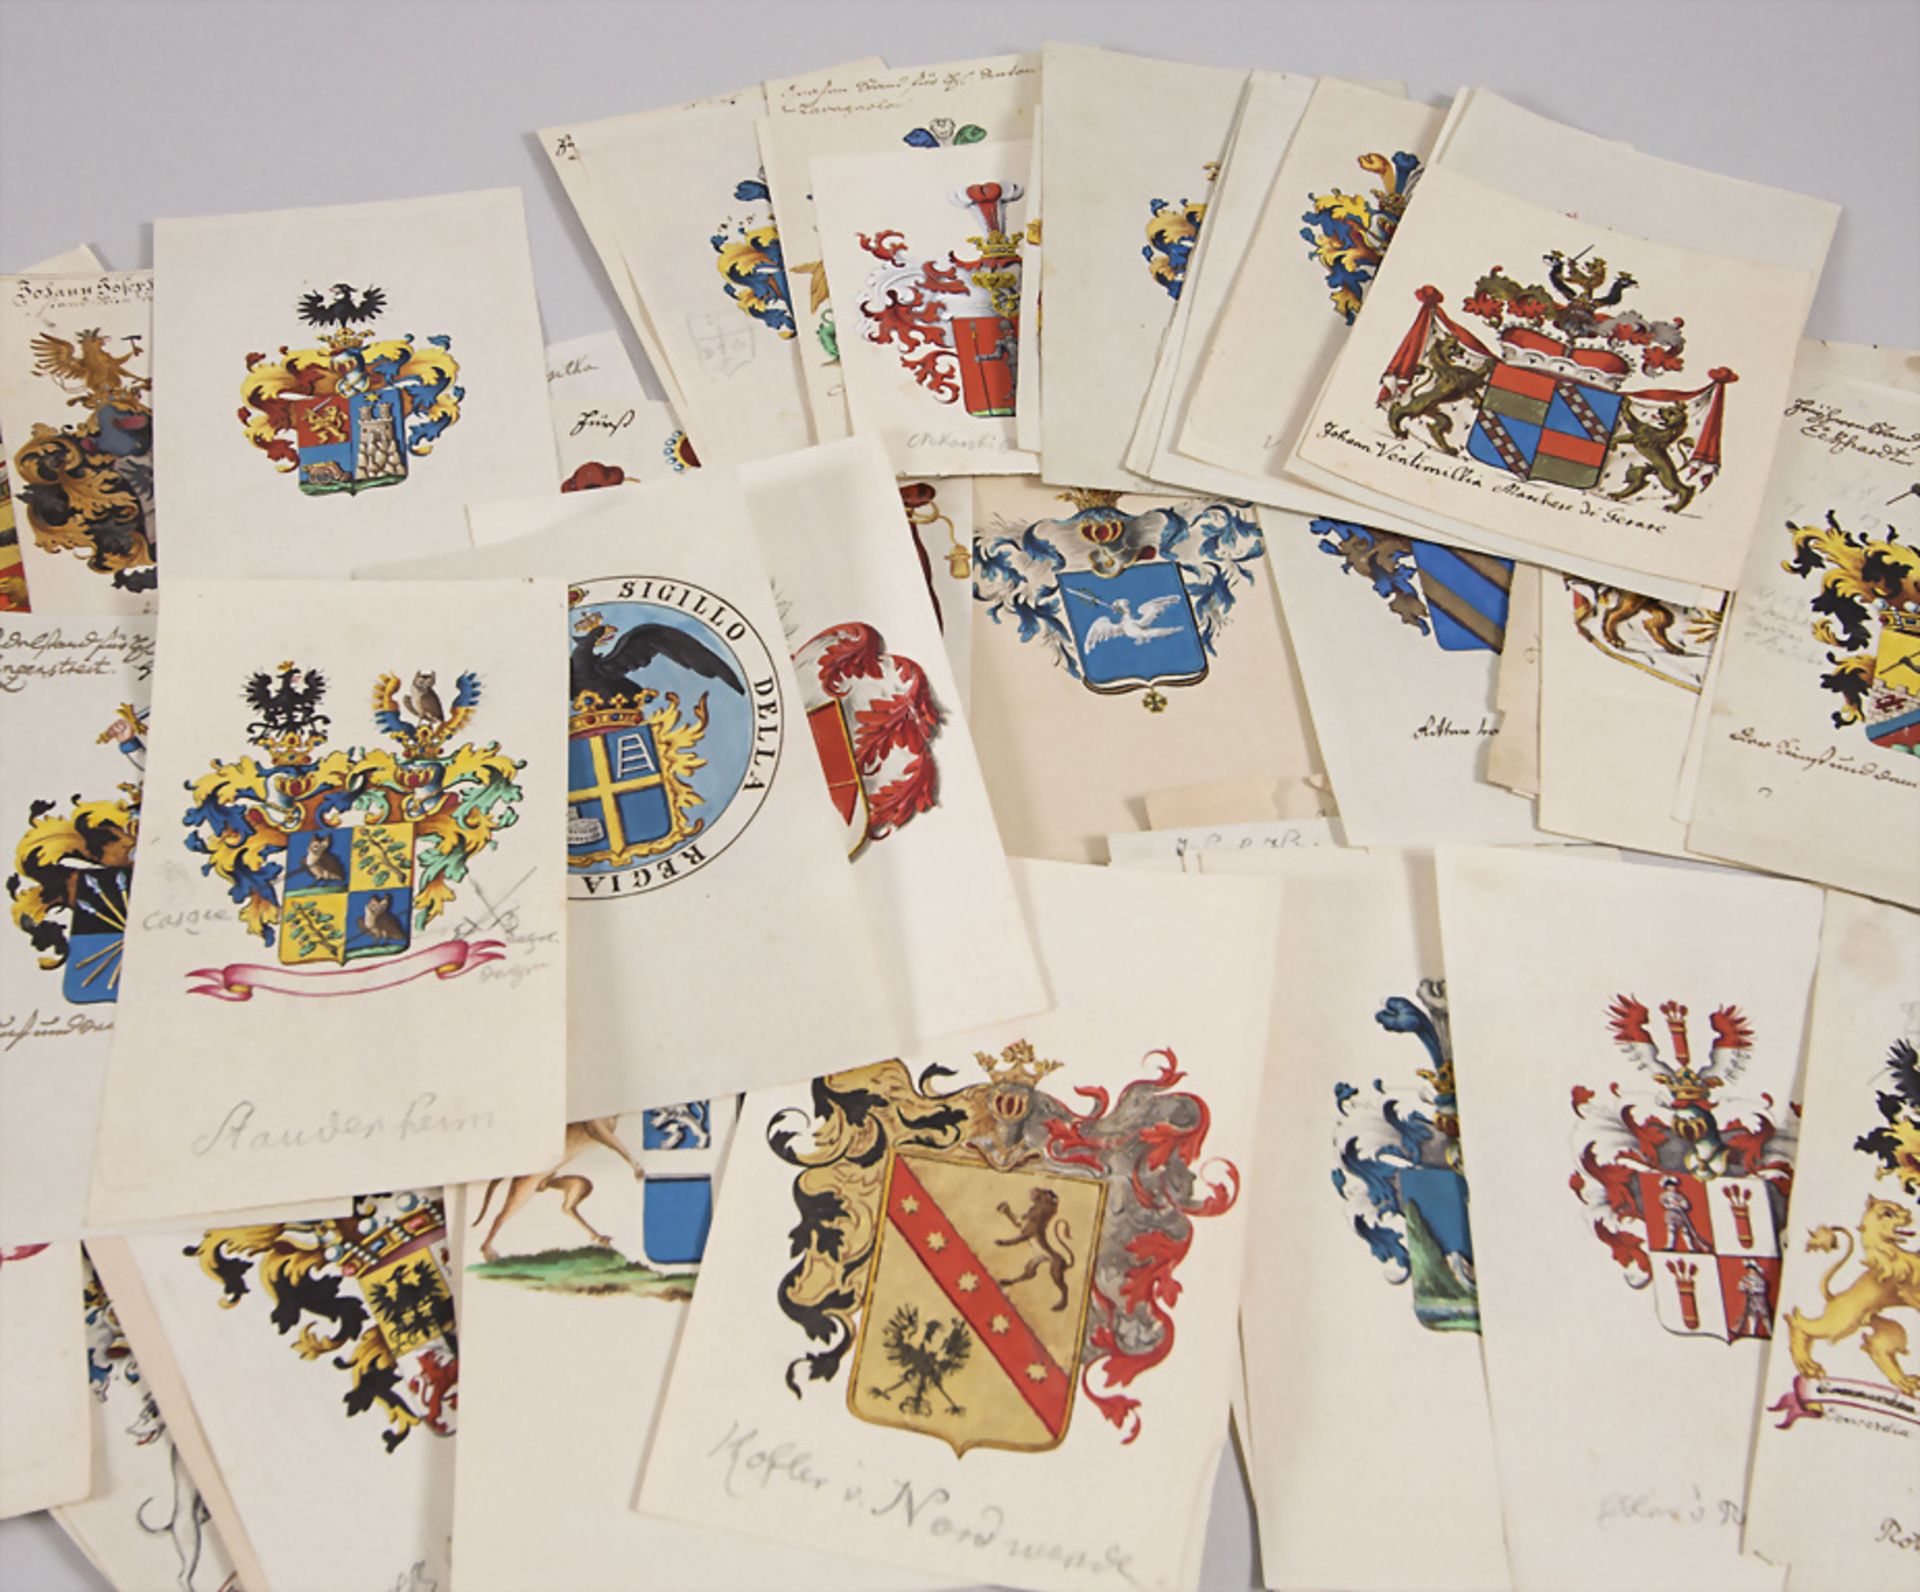 Sammlung handgemalter Adelswappen / A collection of handpainted coat of arms